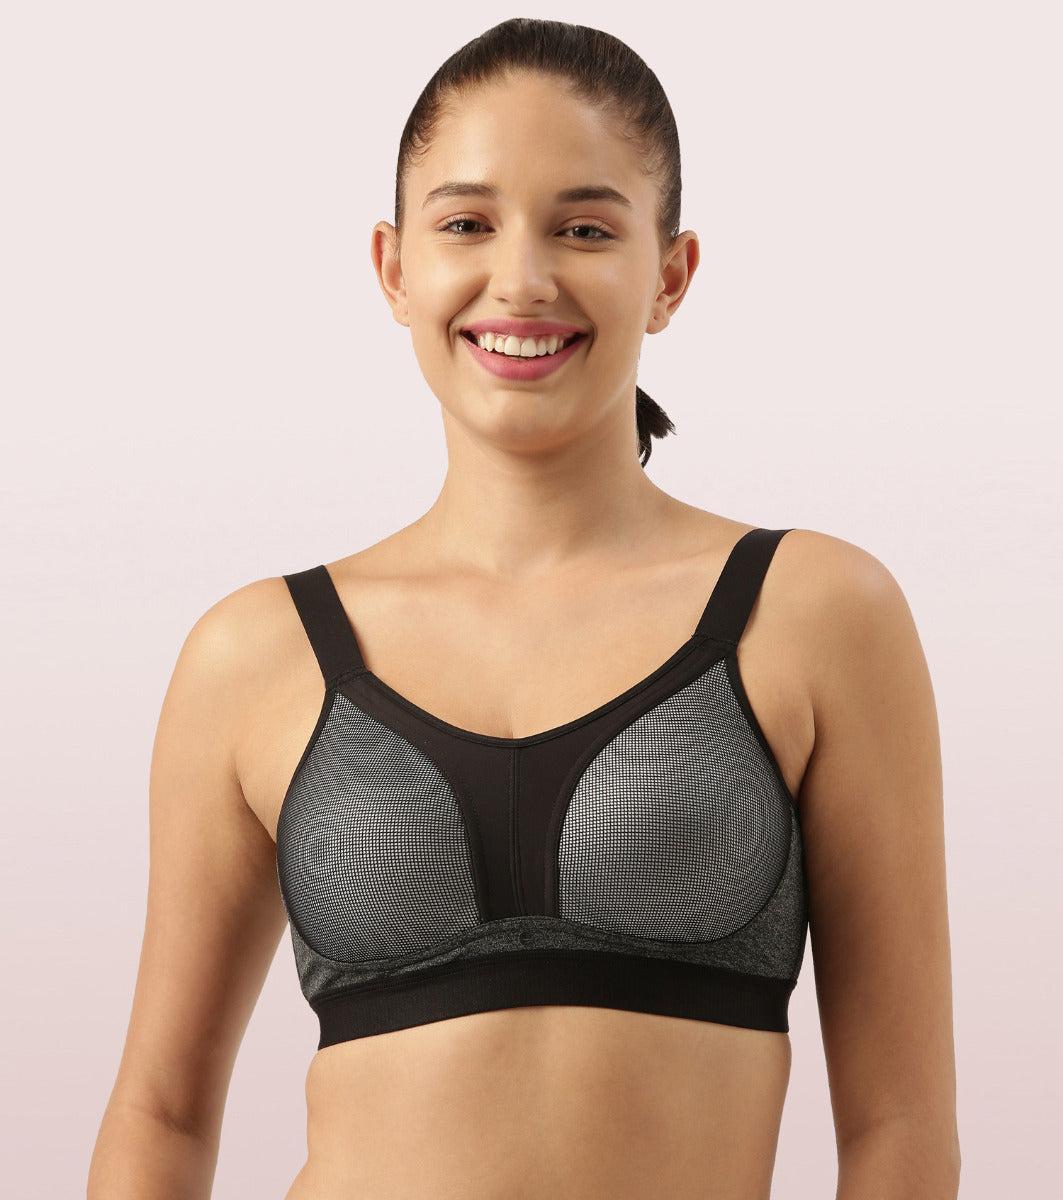 Y-Panel For Bounce Control High Impact Sports Bra